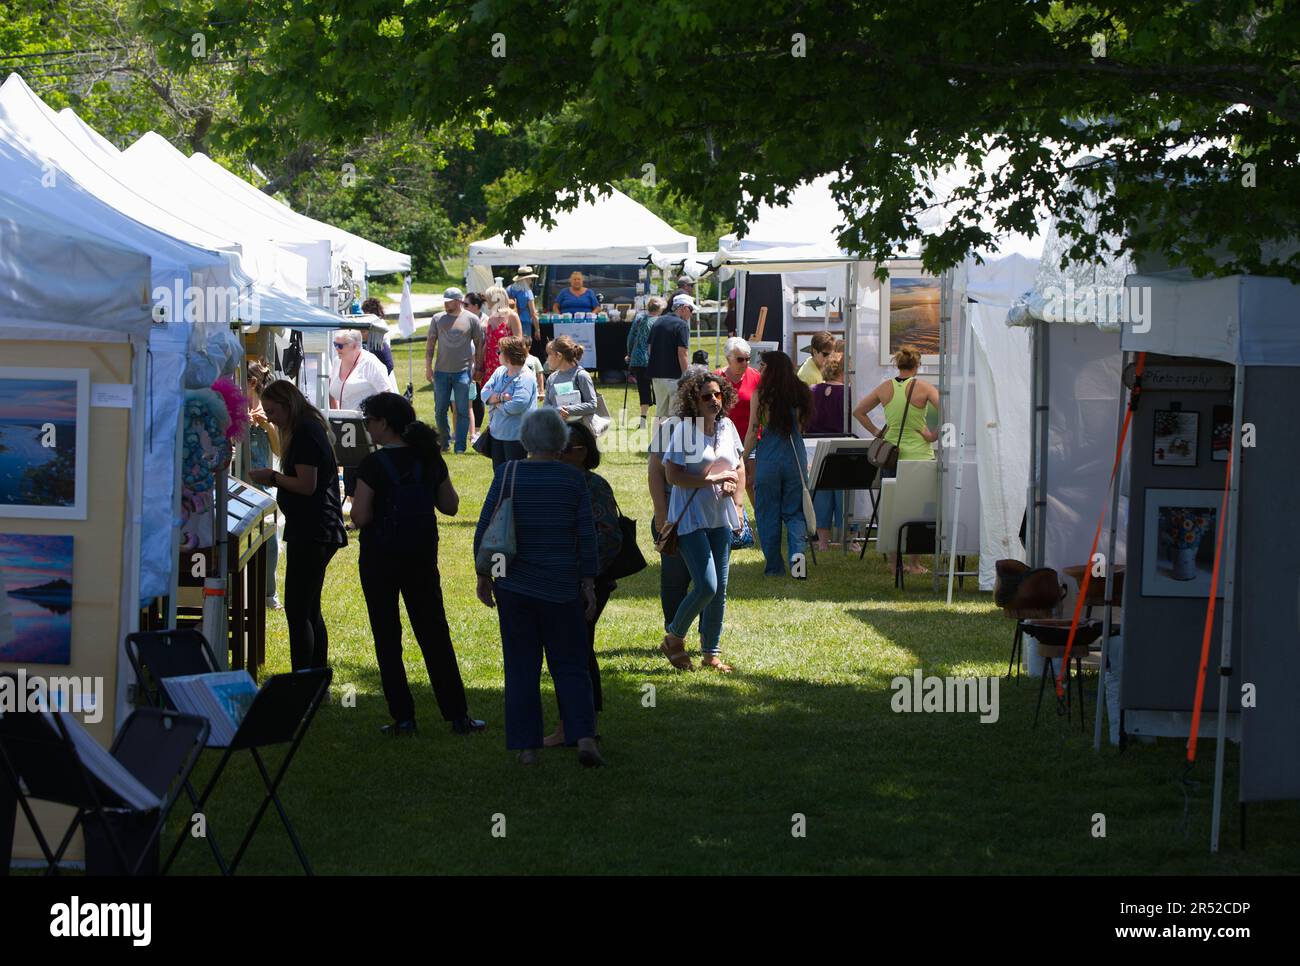 Tents and attendees at an art/craft show in Brewster, Massachusetts (Cape Cod), USA Stock Photo